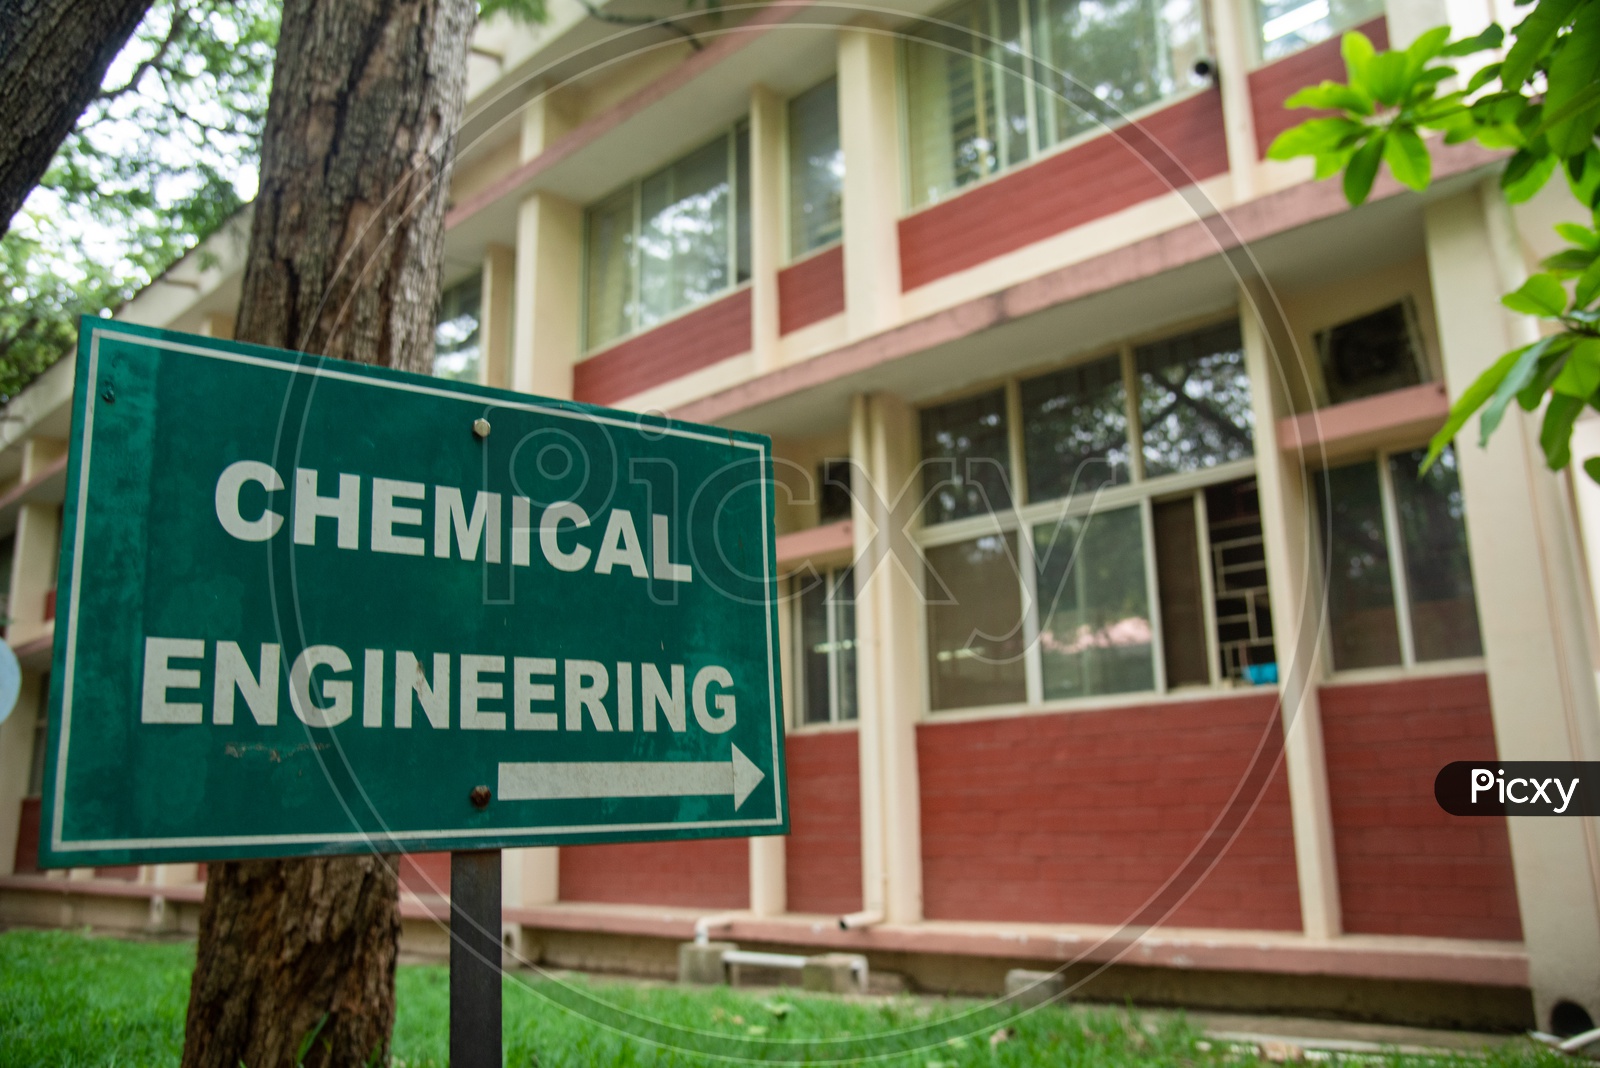 Chemical Engineering Department in IISC Campus